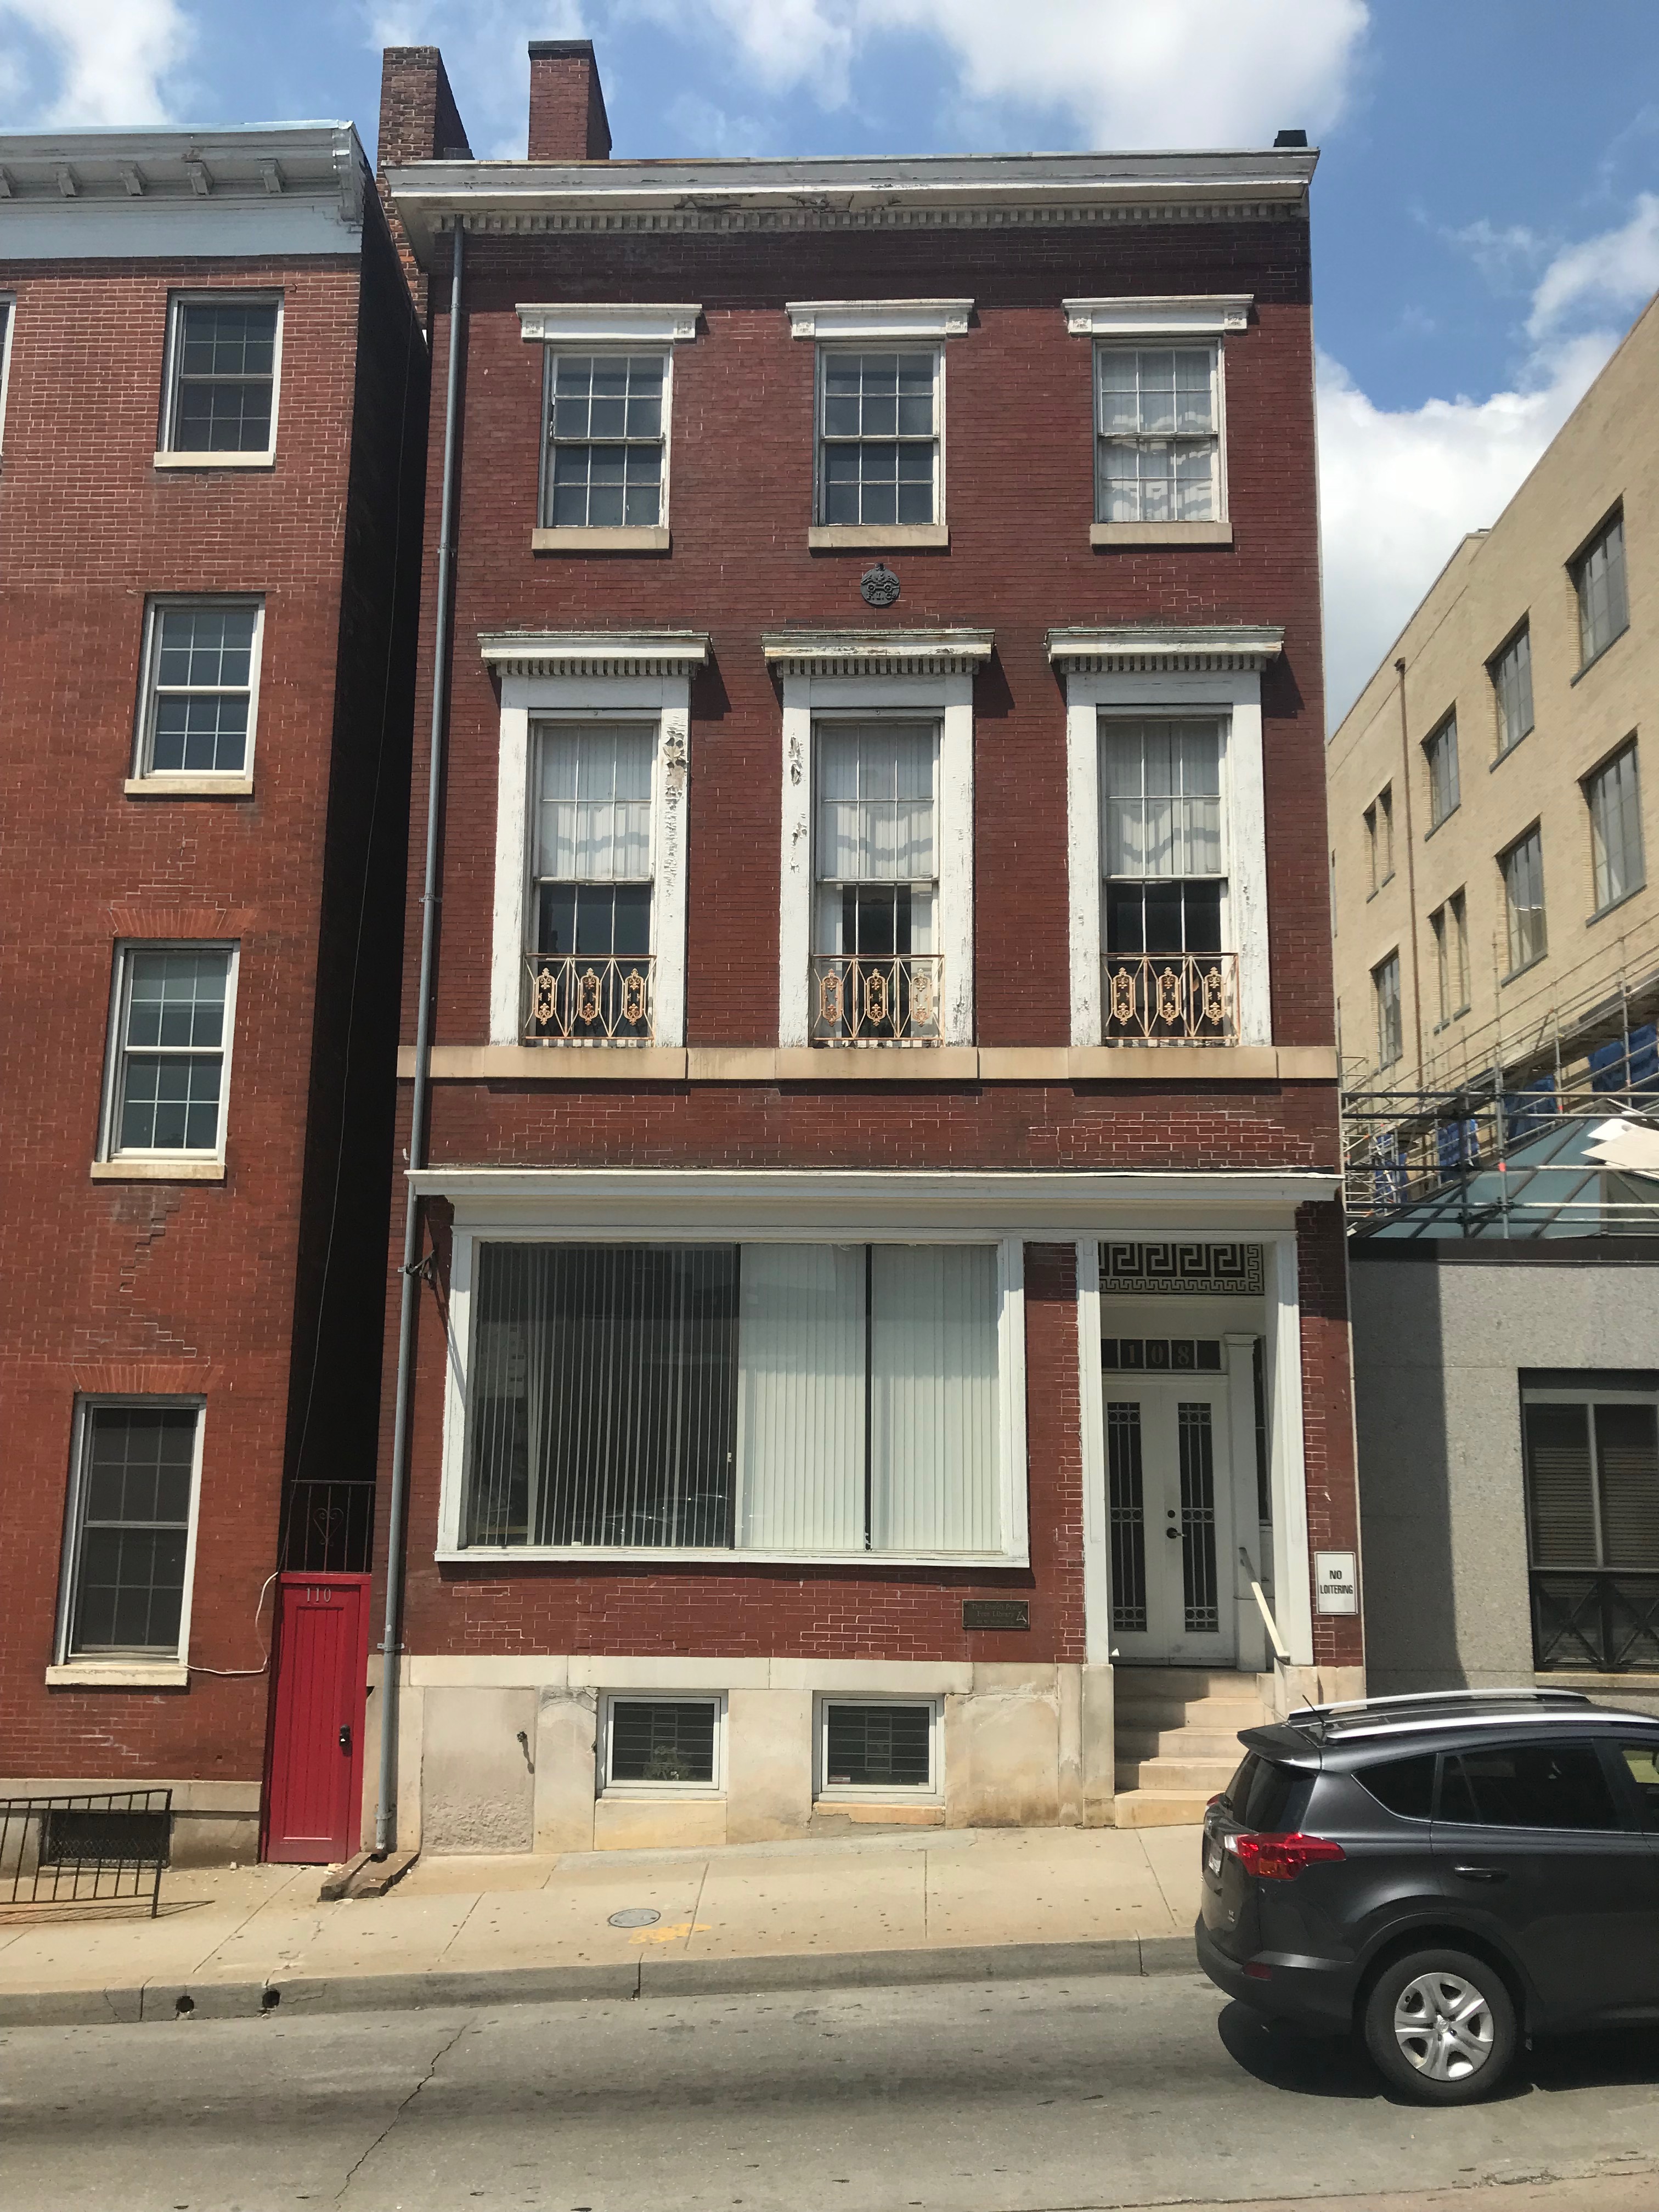 Rowhouse, 108 W. Mulberry Street, Baltimore, MD 21201, Architecture, Baltimore, Baltimore City, Building, HQ Photo